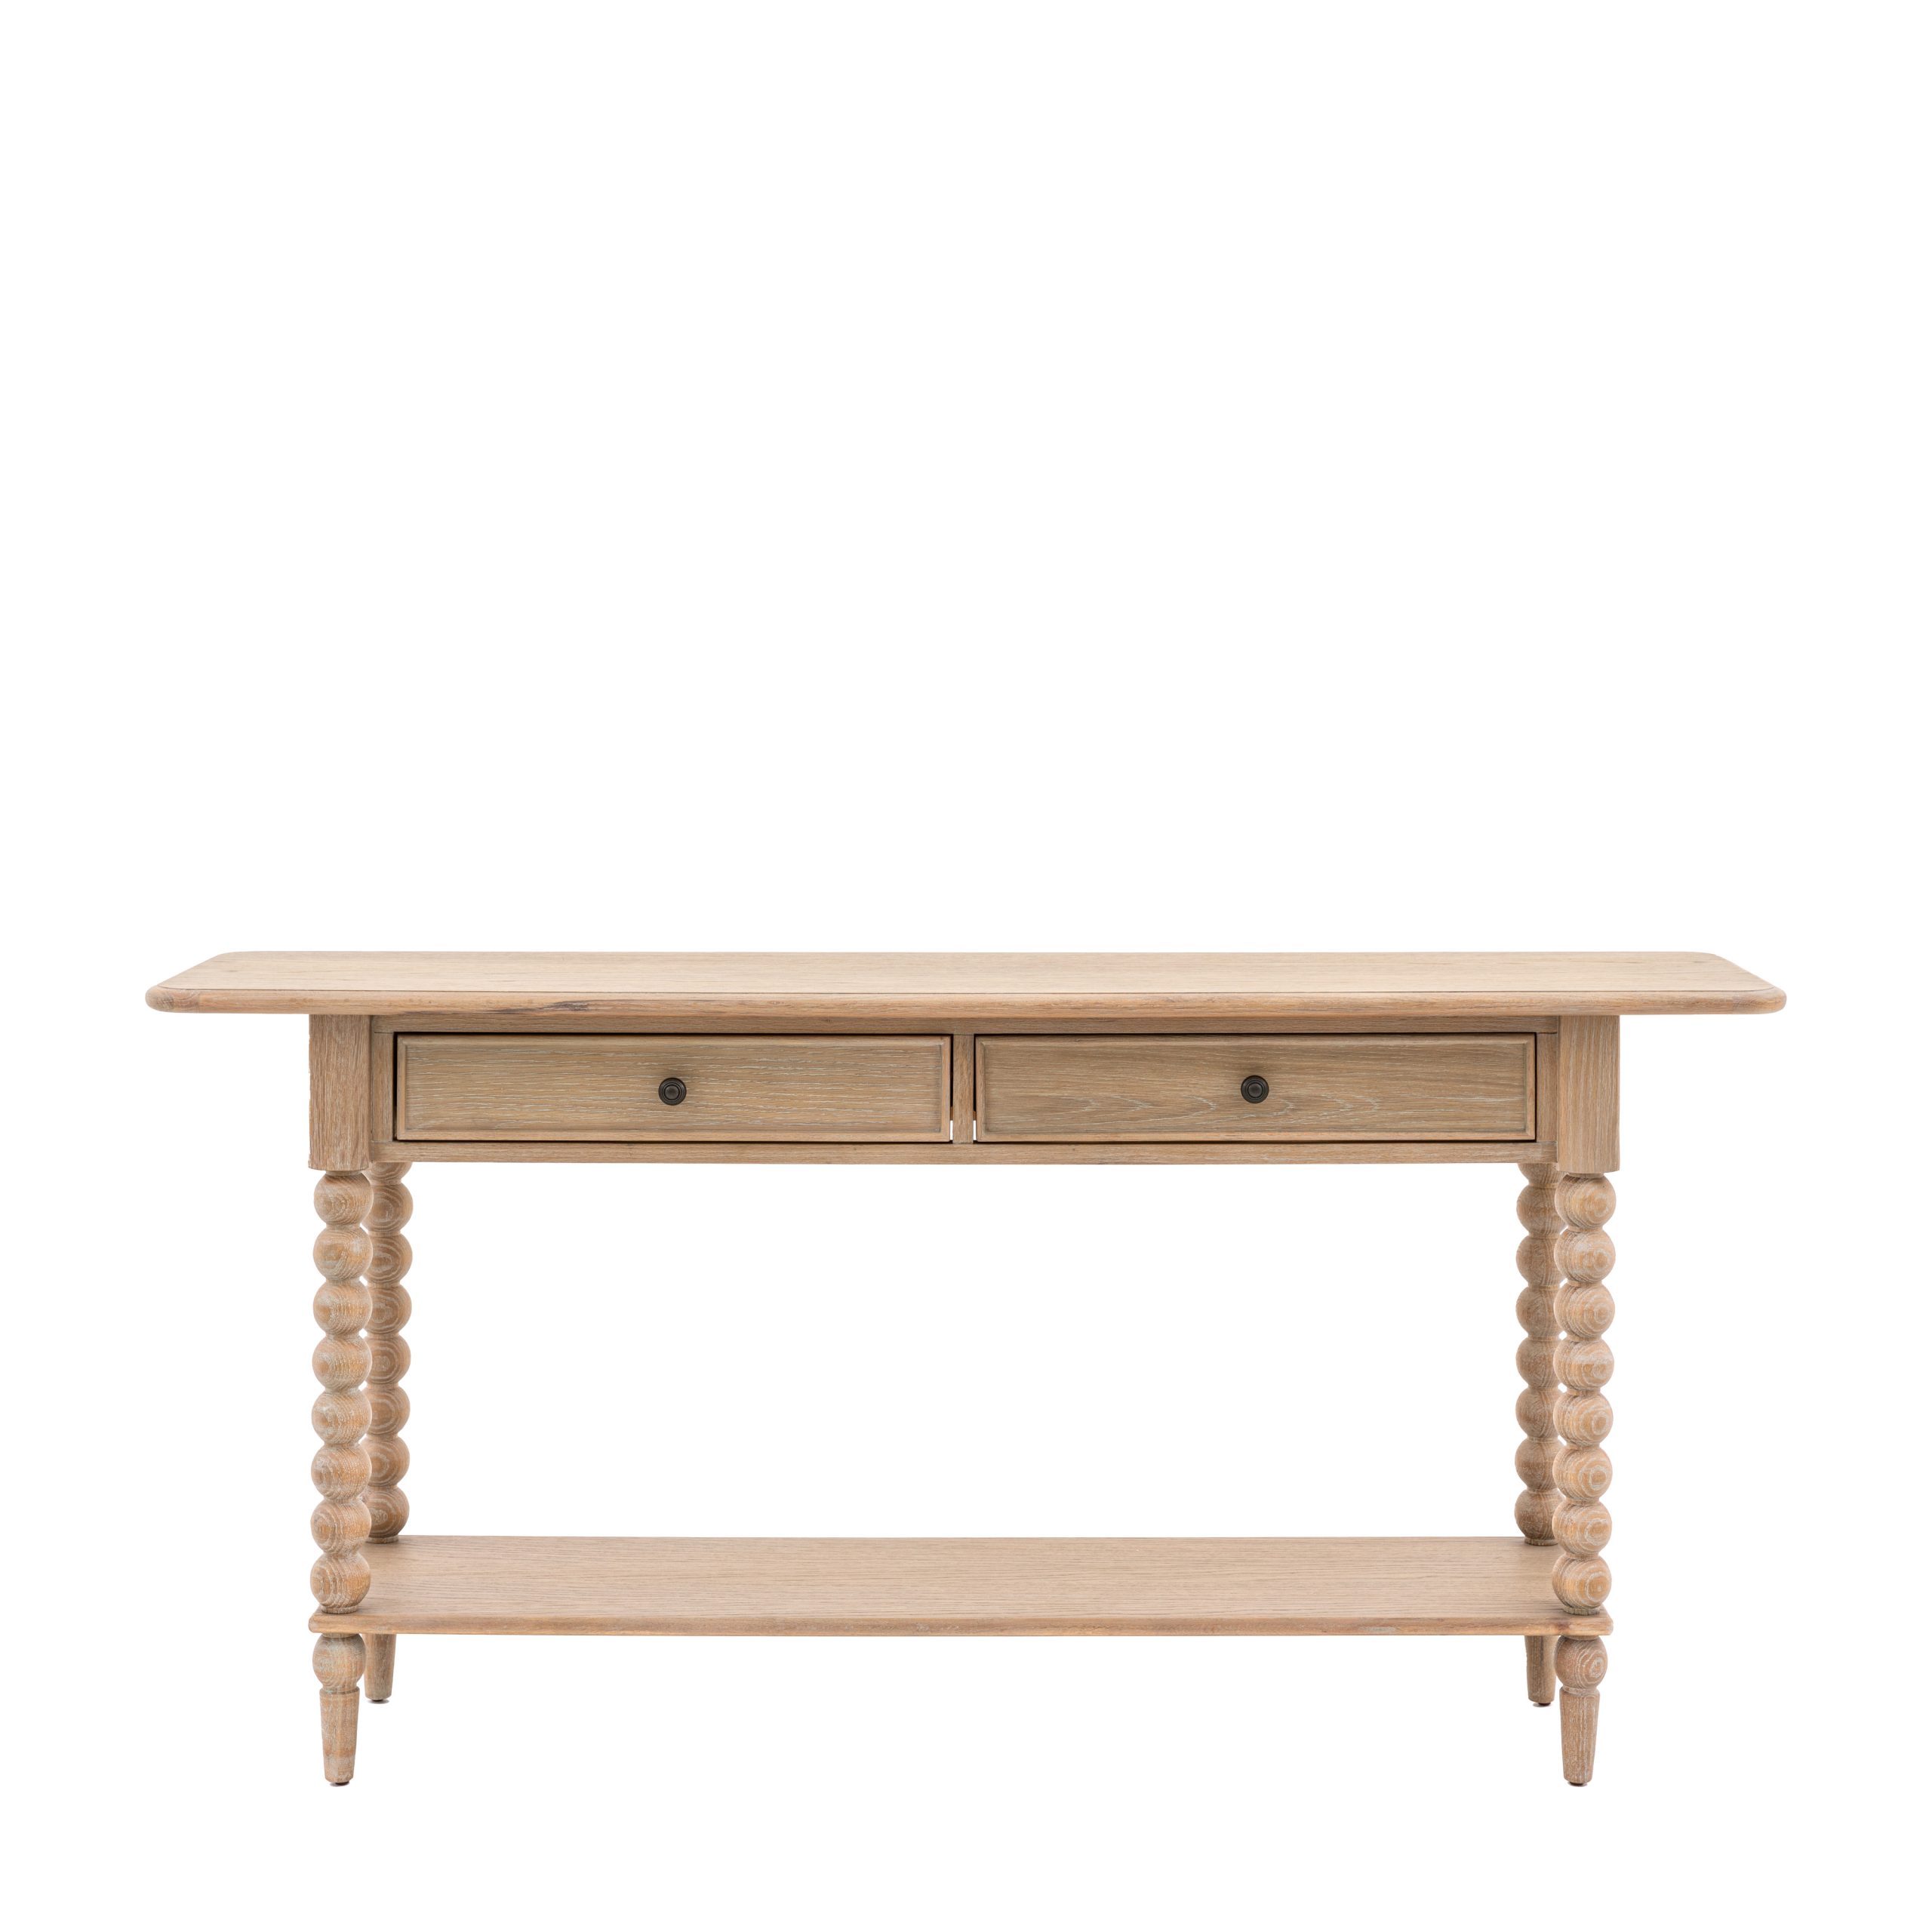 Gallery Direct Artisan 2 Drawer Console Table